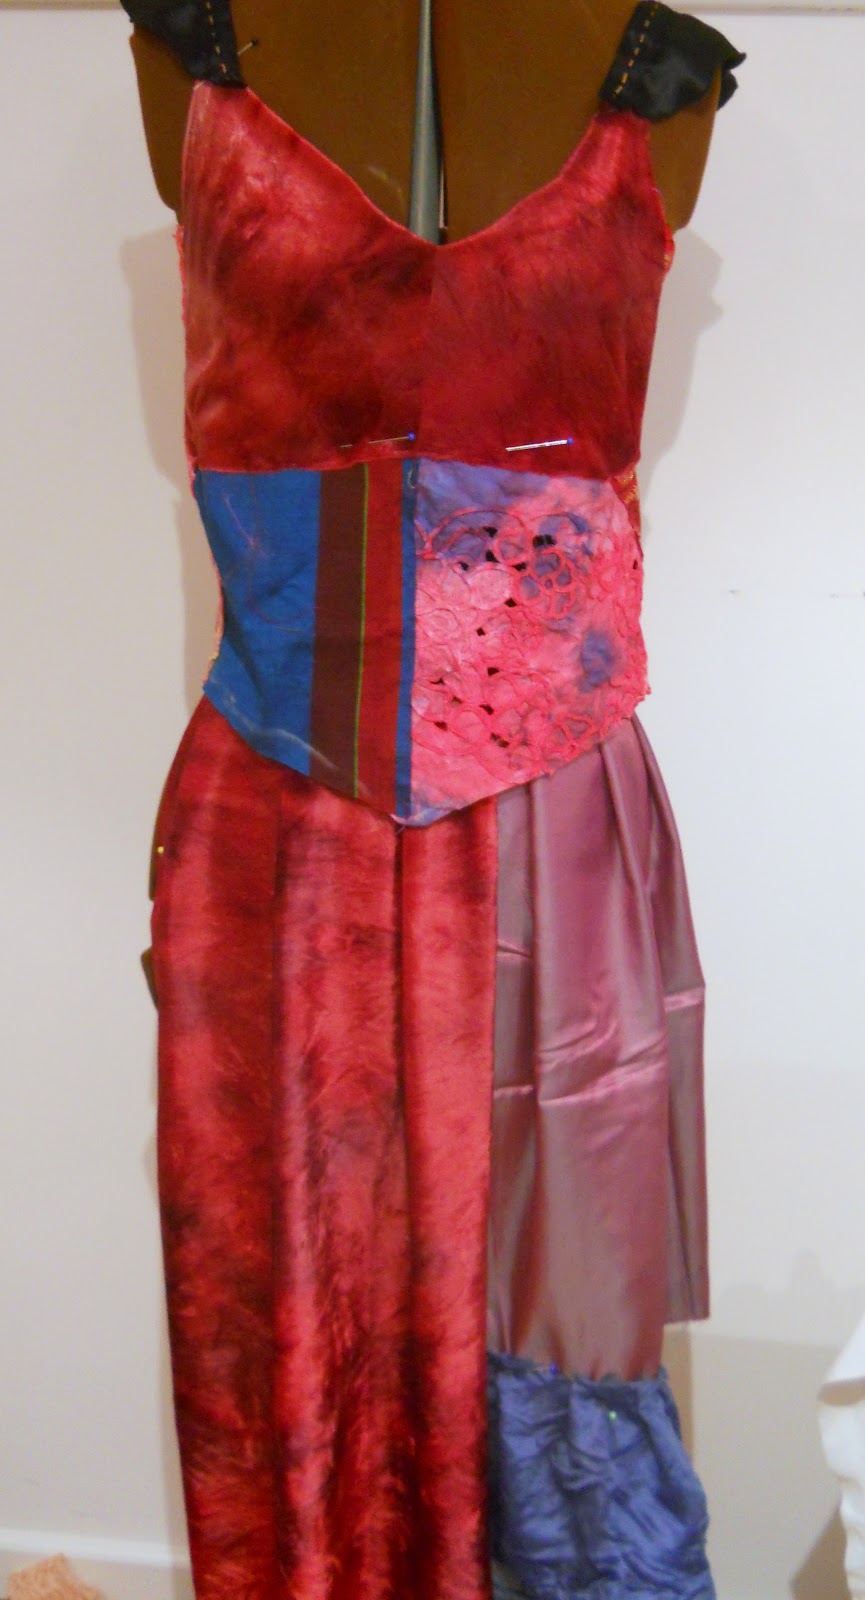 Textile Art by Claire Barrett-Smith: Fashion Design - making a dress is ...